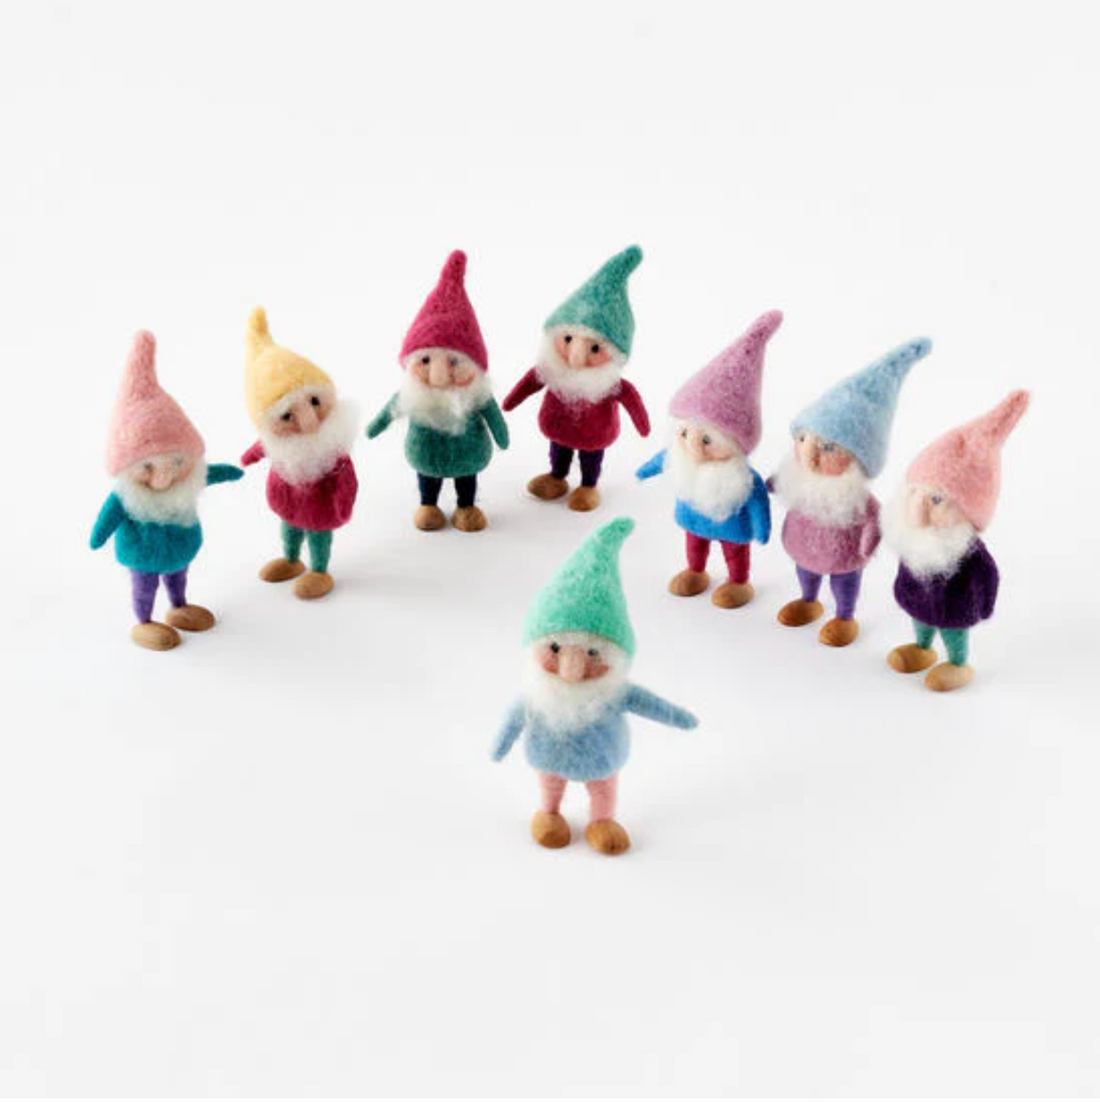 Gnome Figure, Wool (multiple colors)